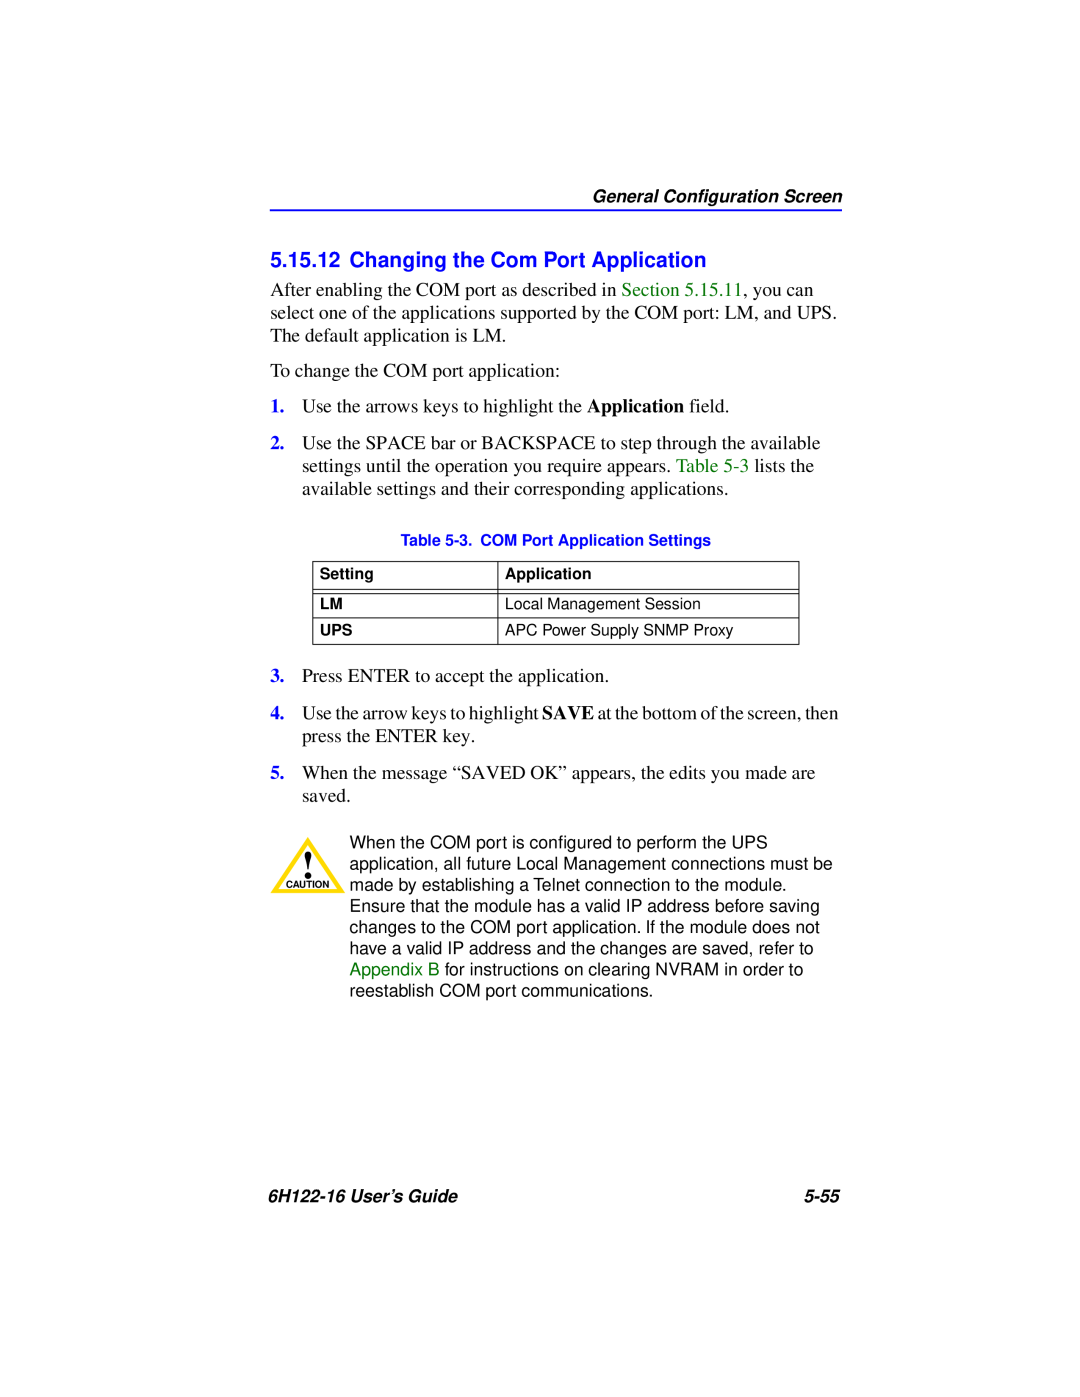 Cabletron Systems 6H122-16 manual Changing the Com Port Application 